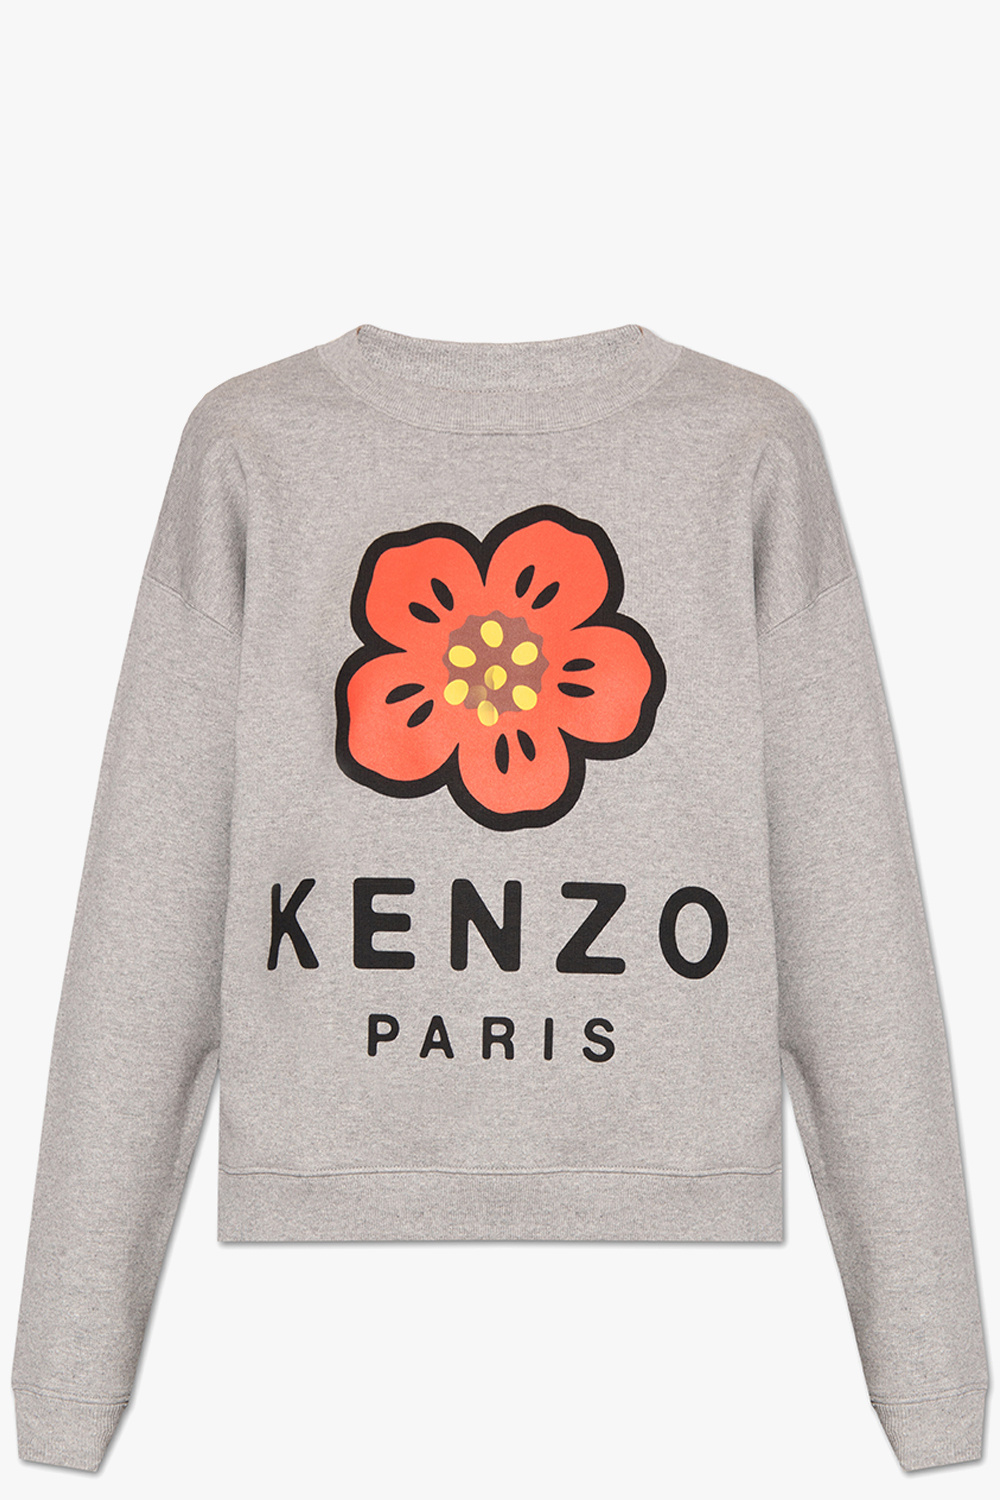 Louis Vuitton presents the Snow collection Kenzo - IetpShops GB